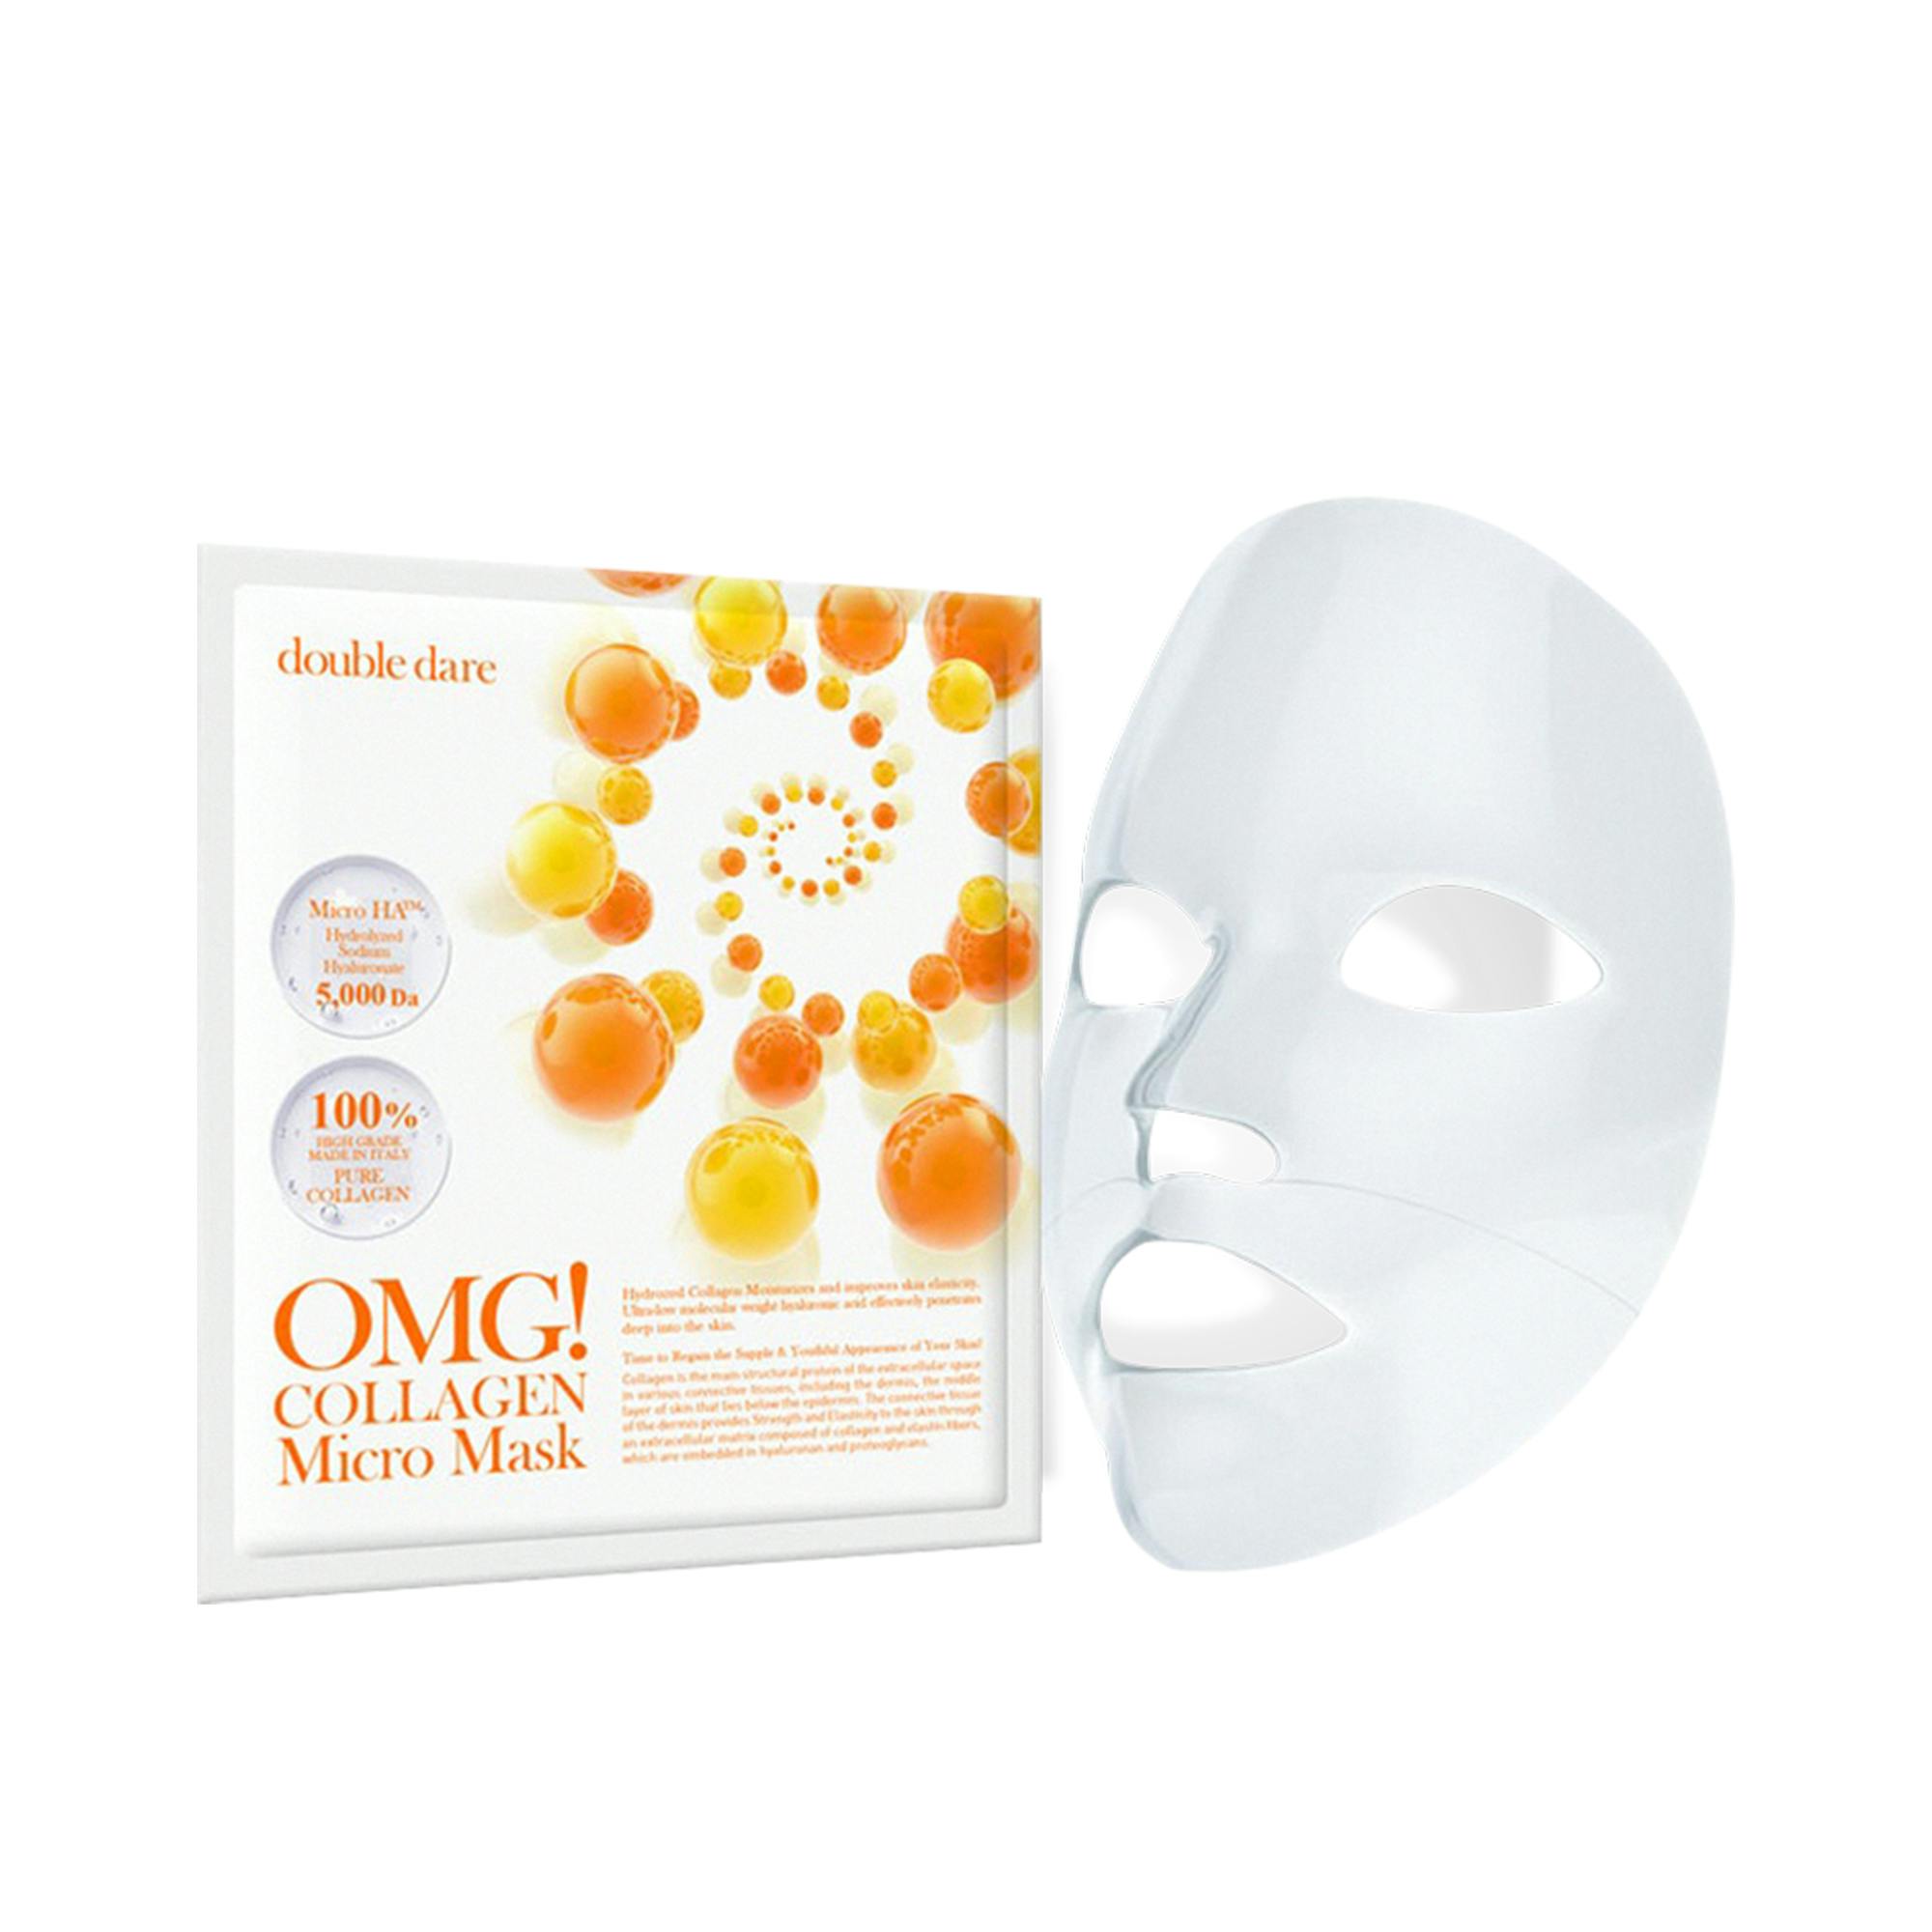 OMG! Double Dare OMG! Collagen Micro Mask 1 st